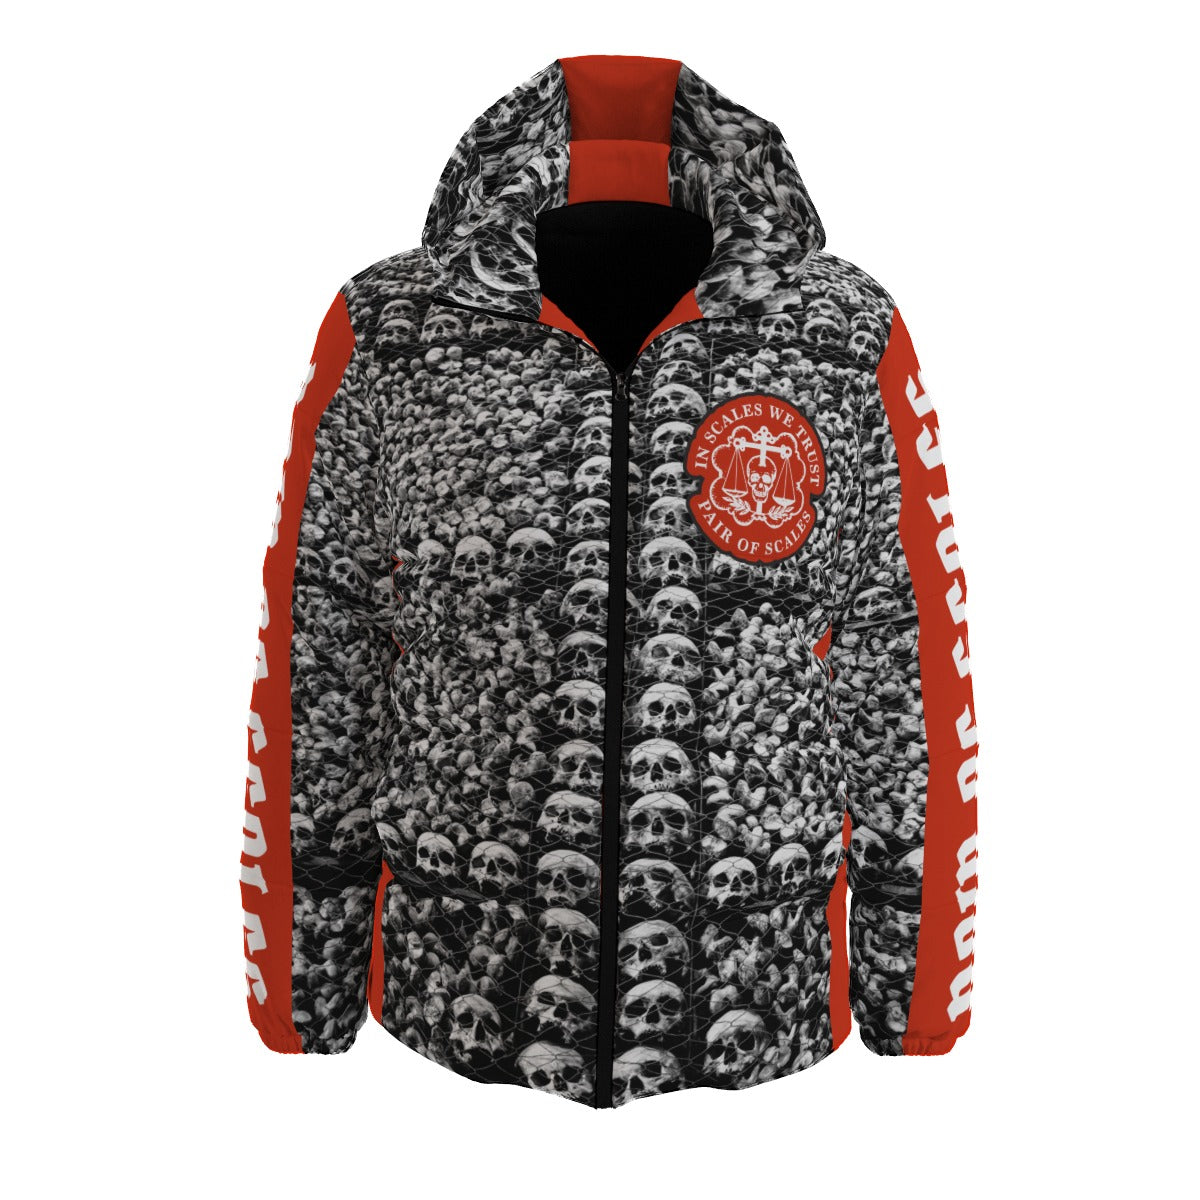 Skull Yard Hooded Puffer Jacket (Red) – pairofscales